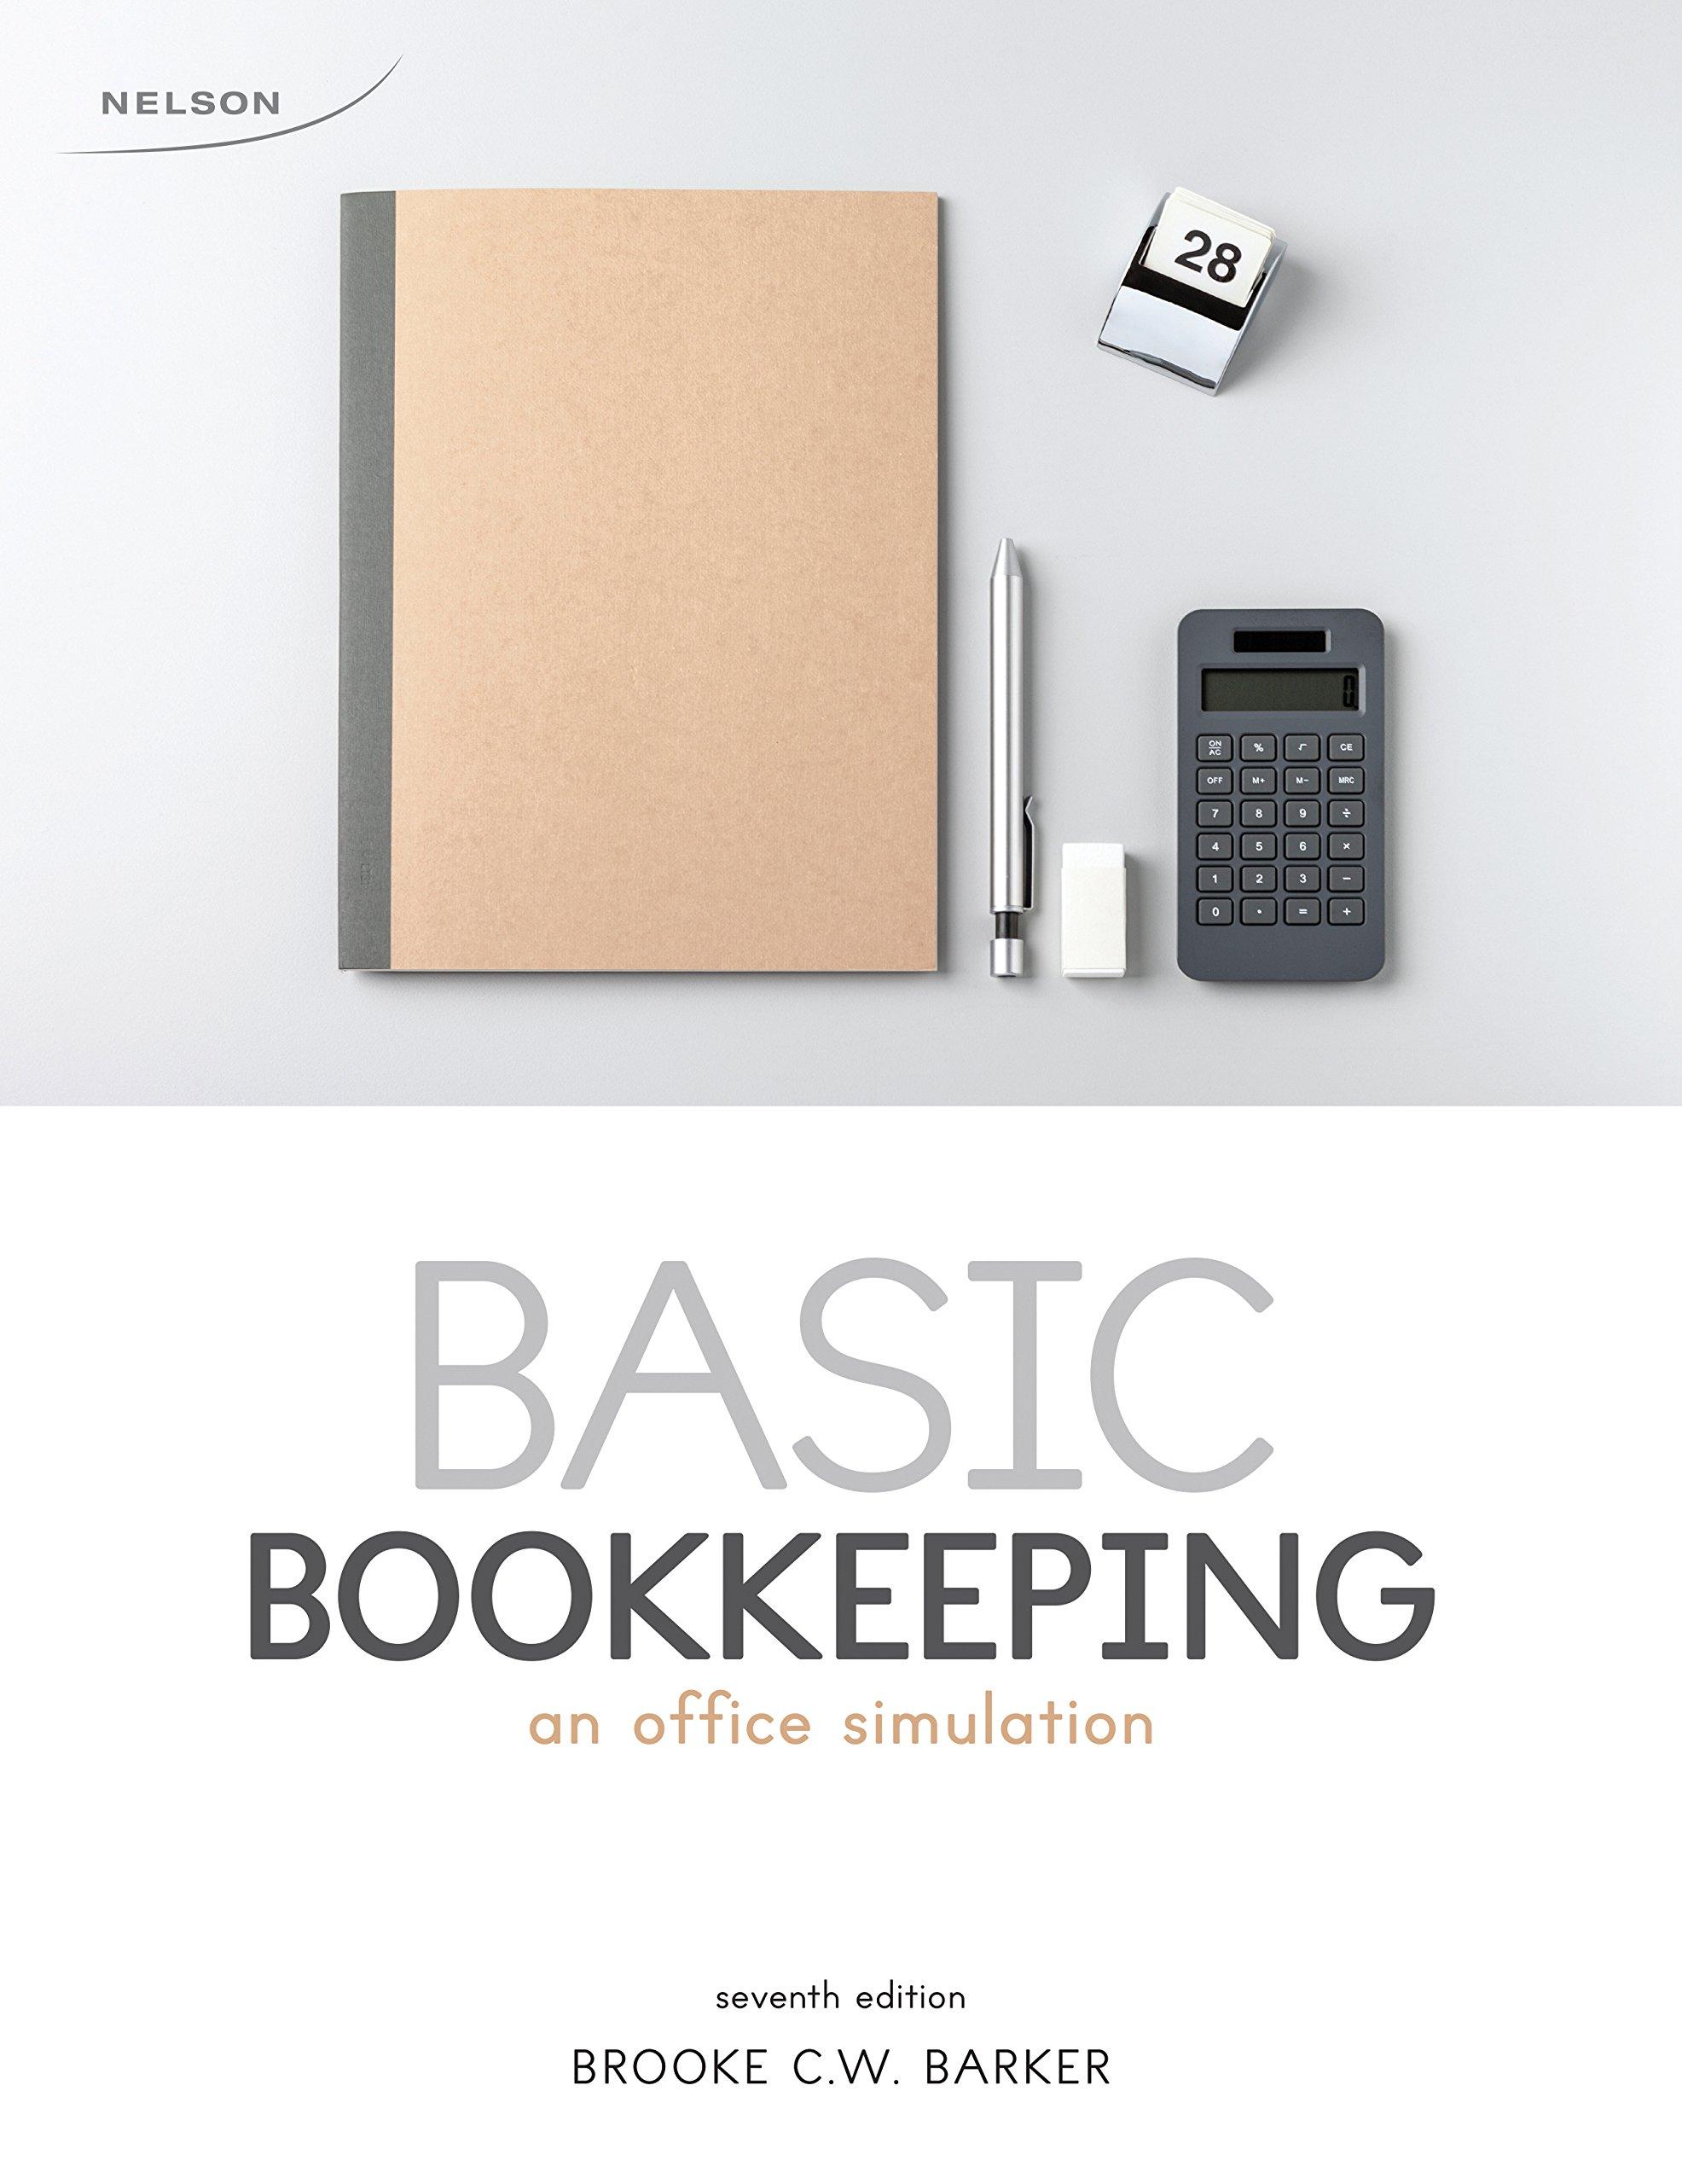 basic bookkeeping an office simulation 7th edition brooke c.w. barker 0176530827, 978-0176530822